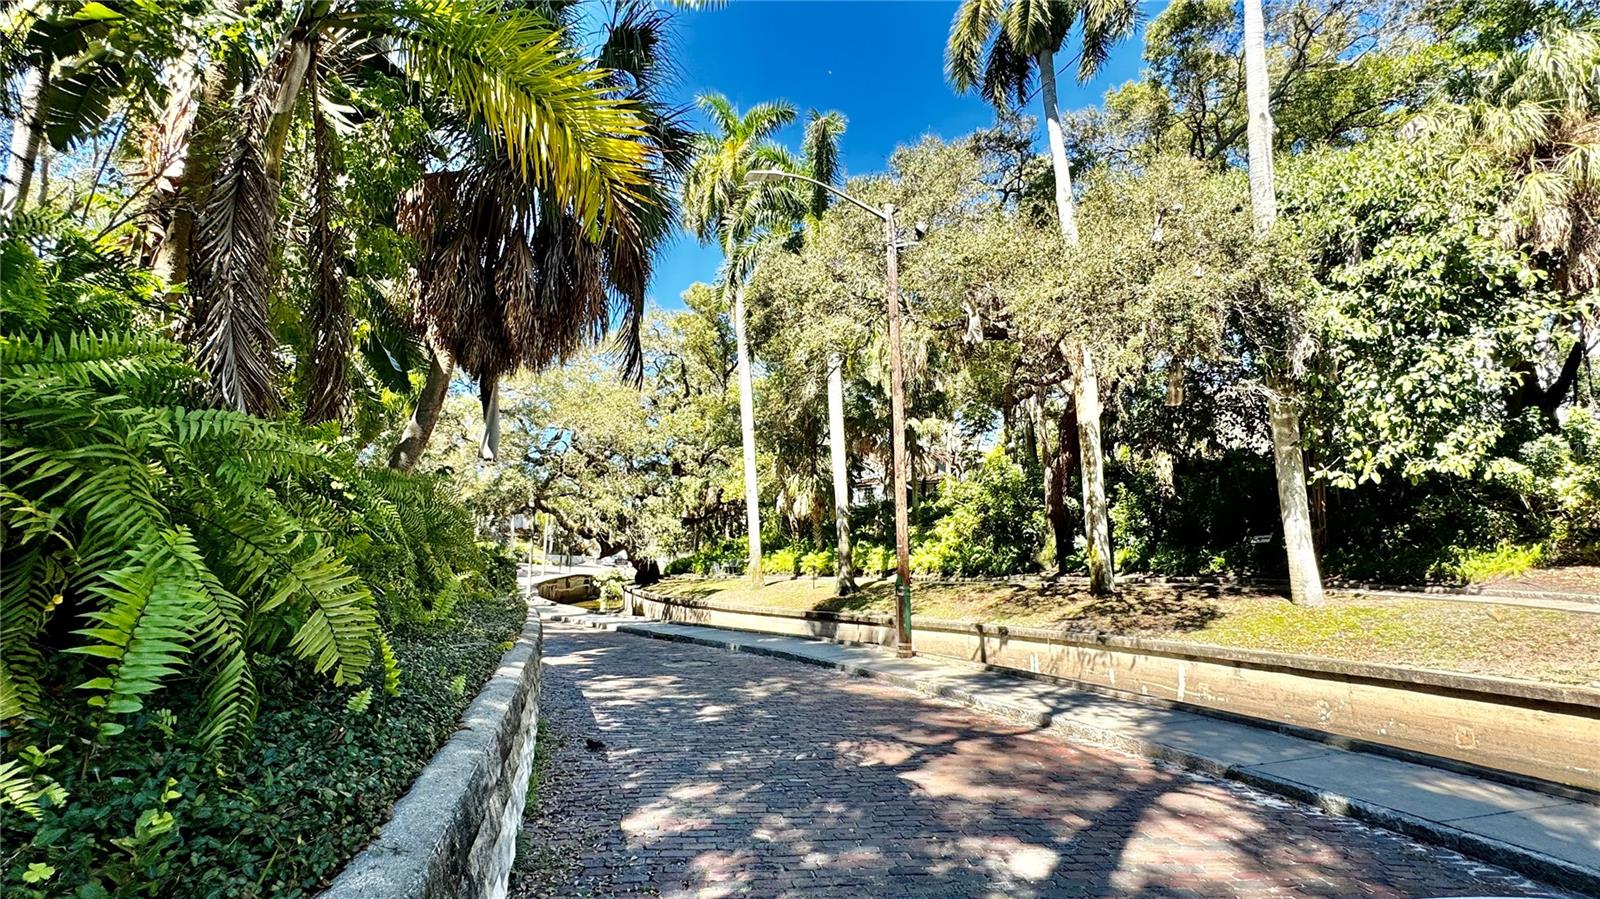 View of Roser Park, with its brick paved streets and lush landscaped backdrop. A perfect place to stroll and enjoy a step back in time in one of St Petersburg's most historic and iconic neighborhoods.